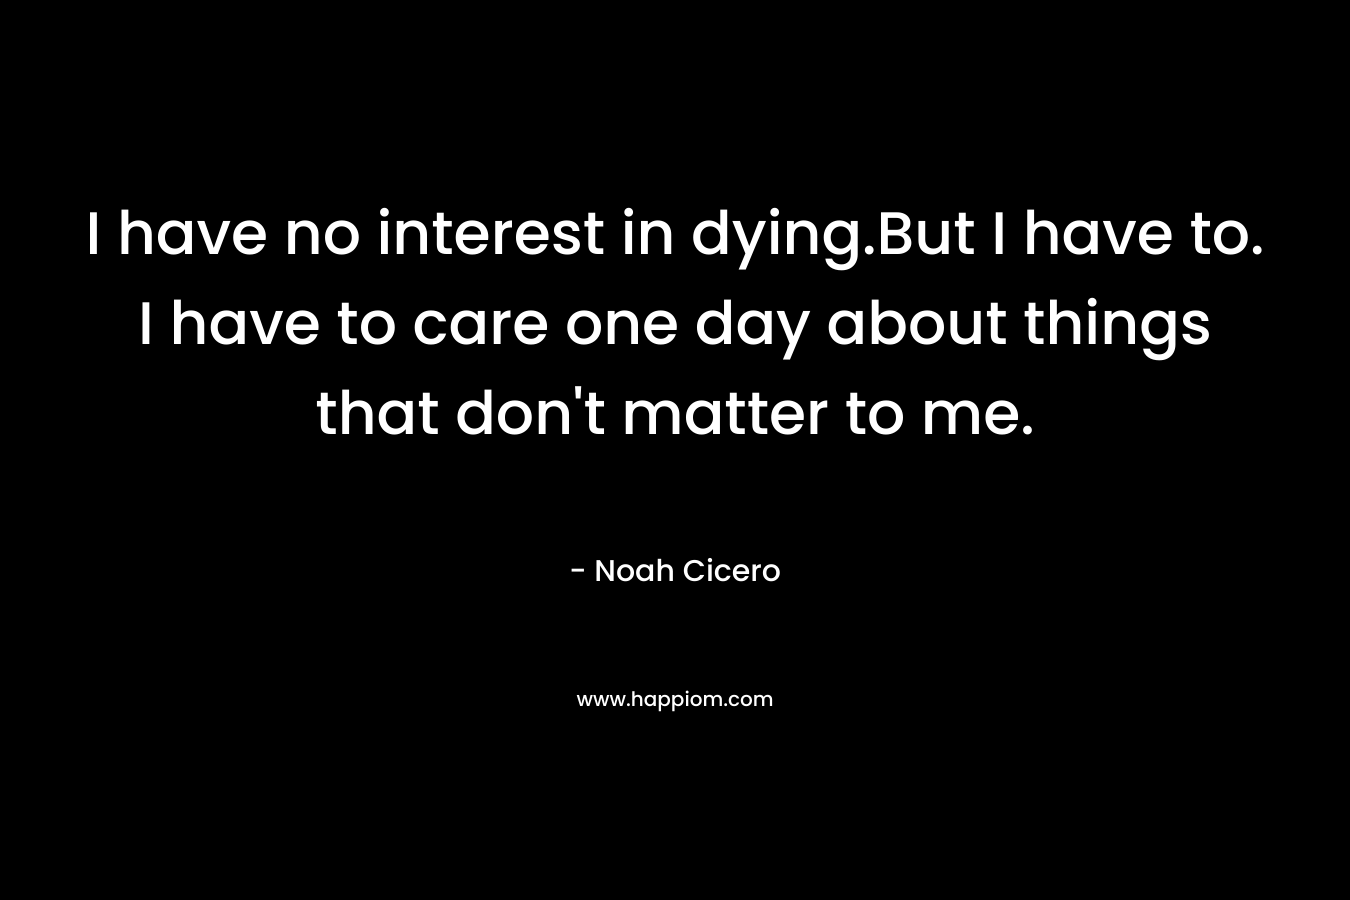 I have no interest in dying.But I have to. I have to care one day about things that don't matter to me.